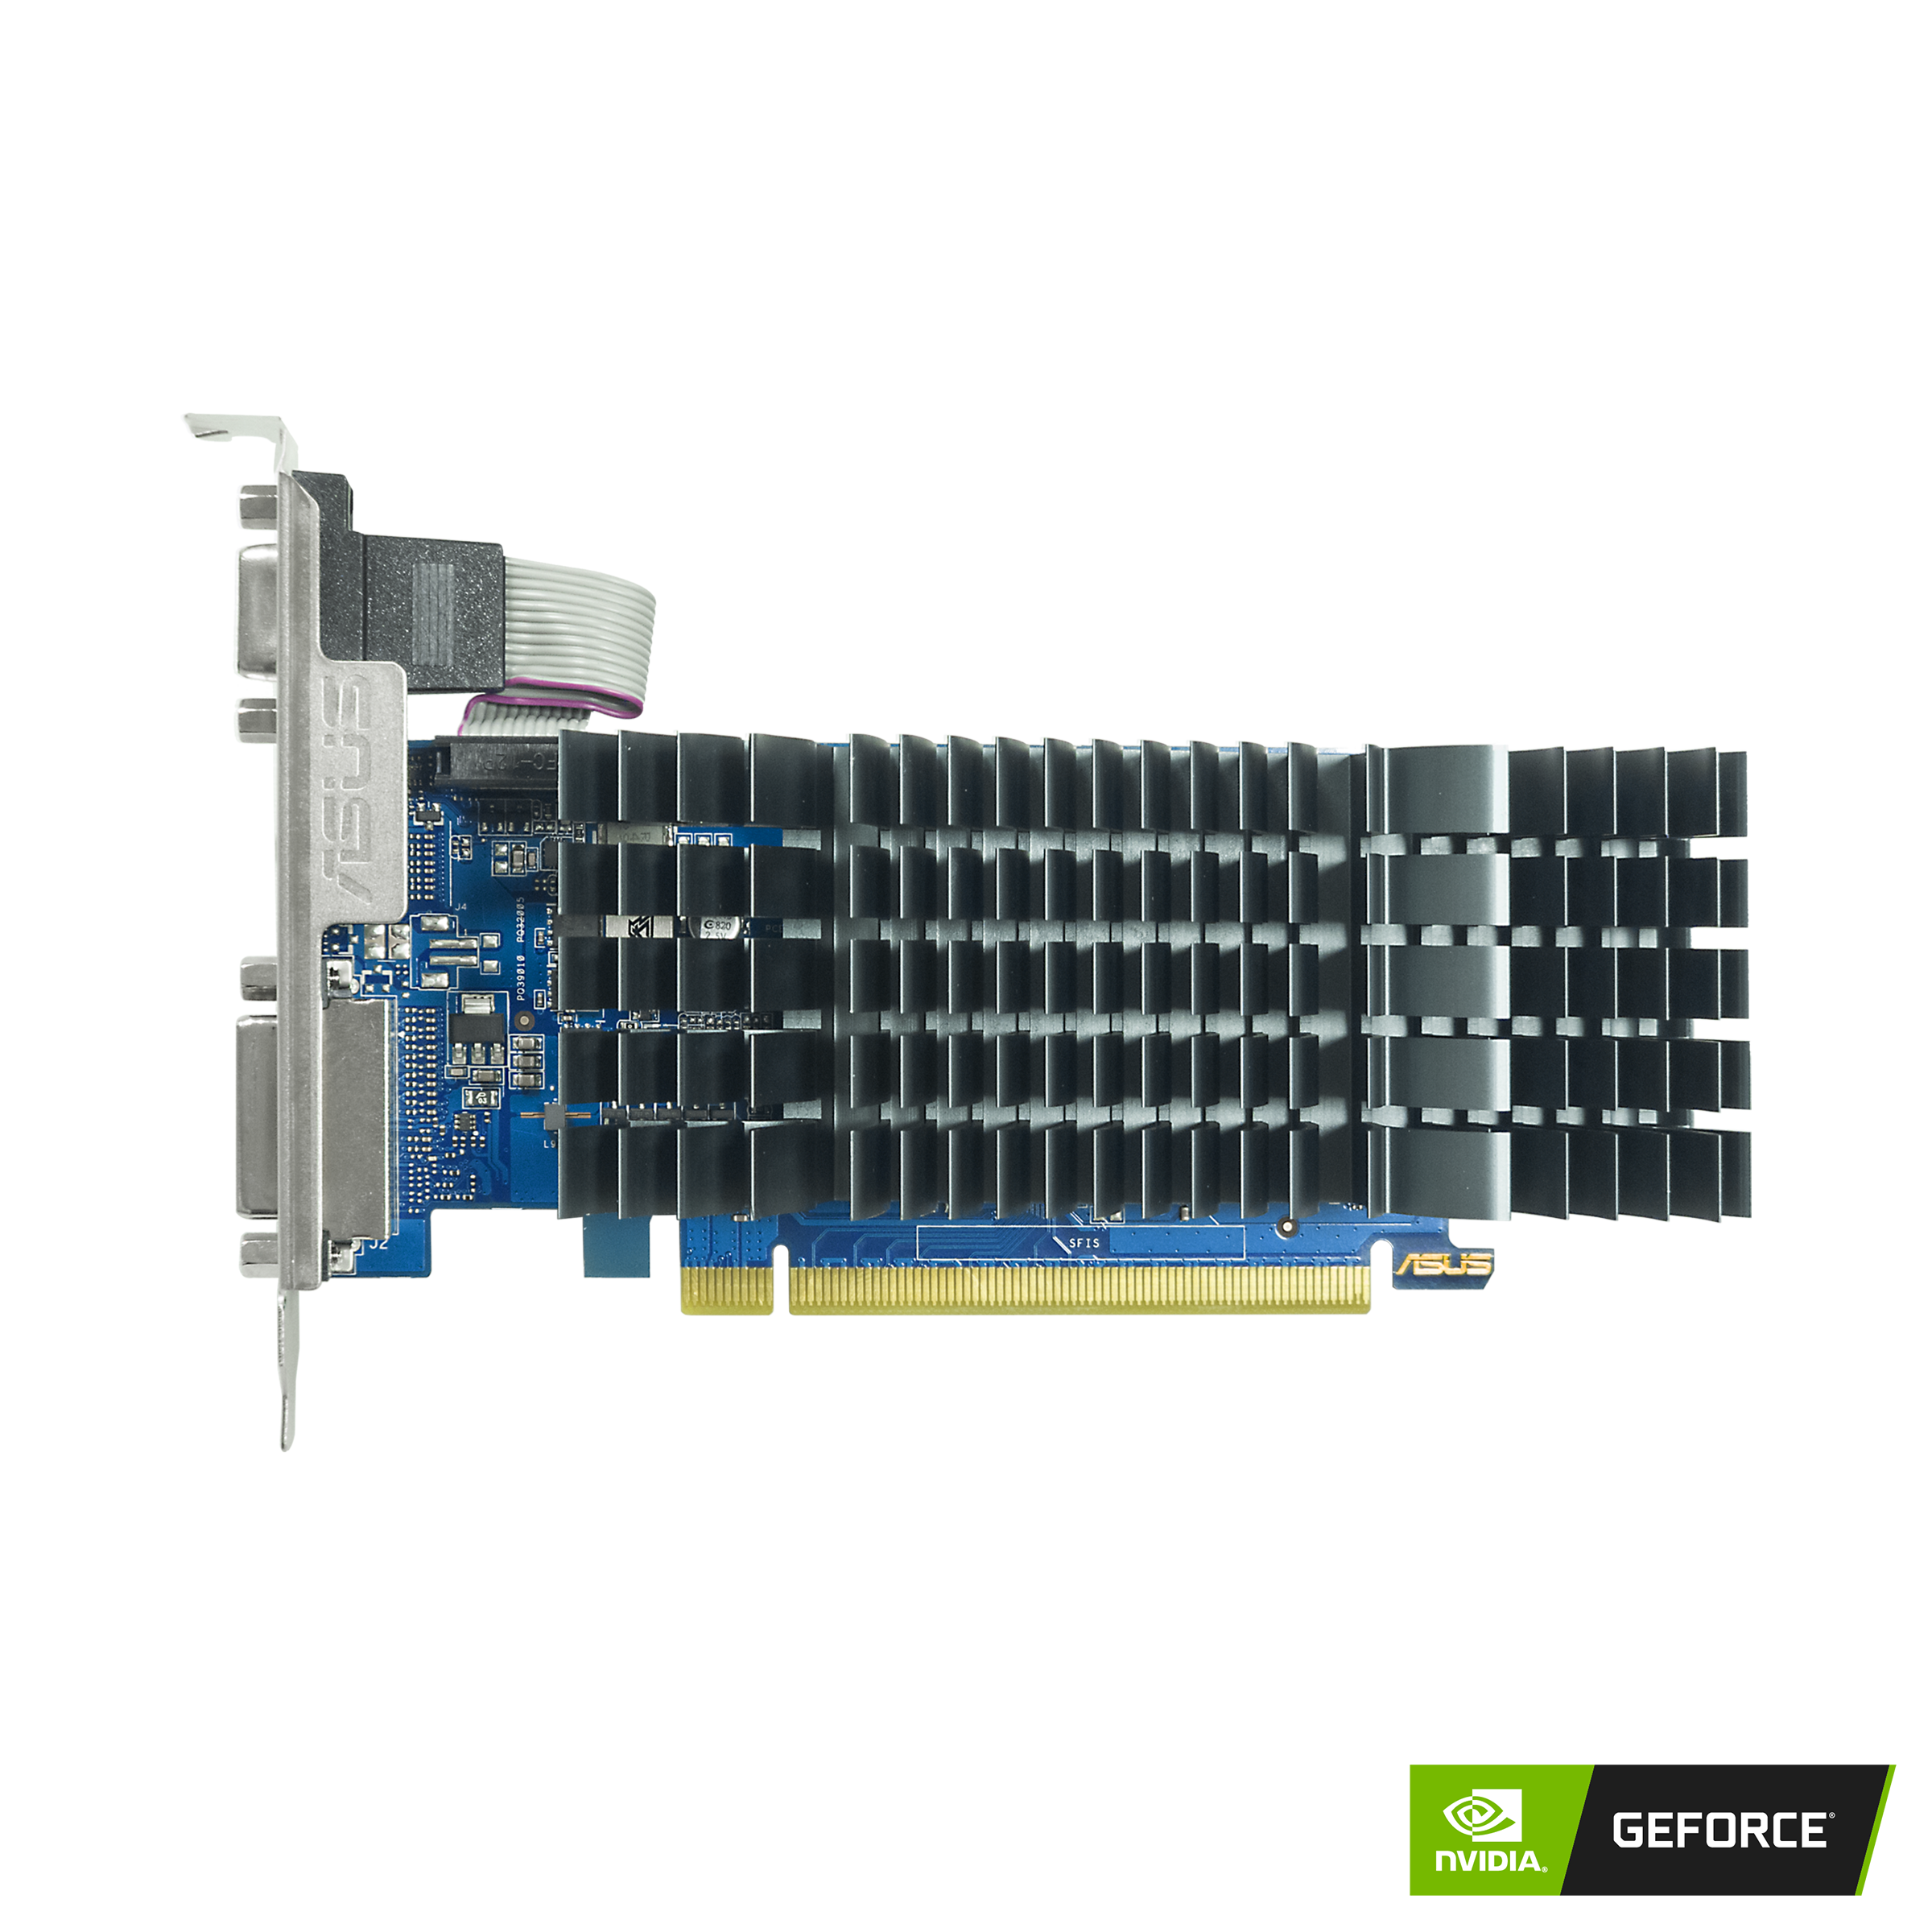  Gigabyte GeForce GT 710 2GB Graphic Cards and Support